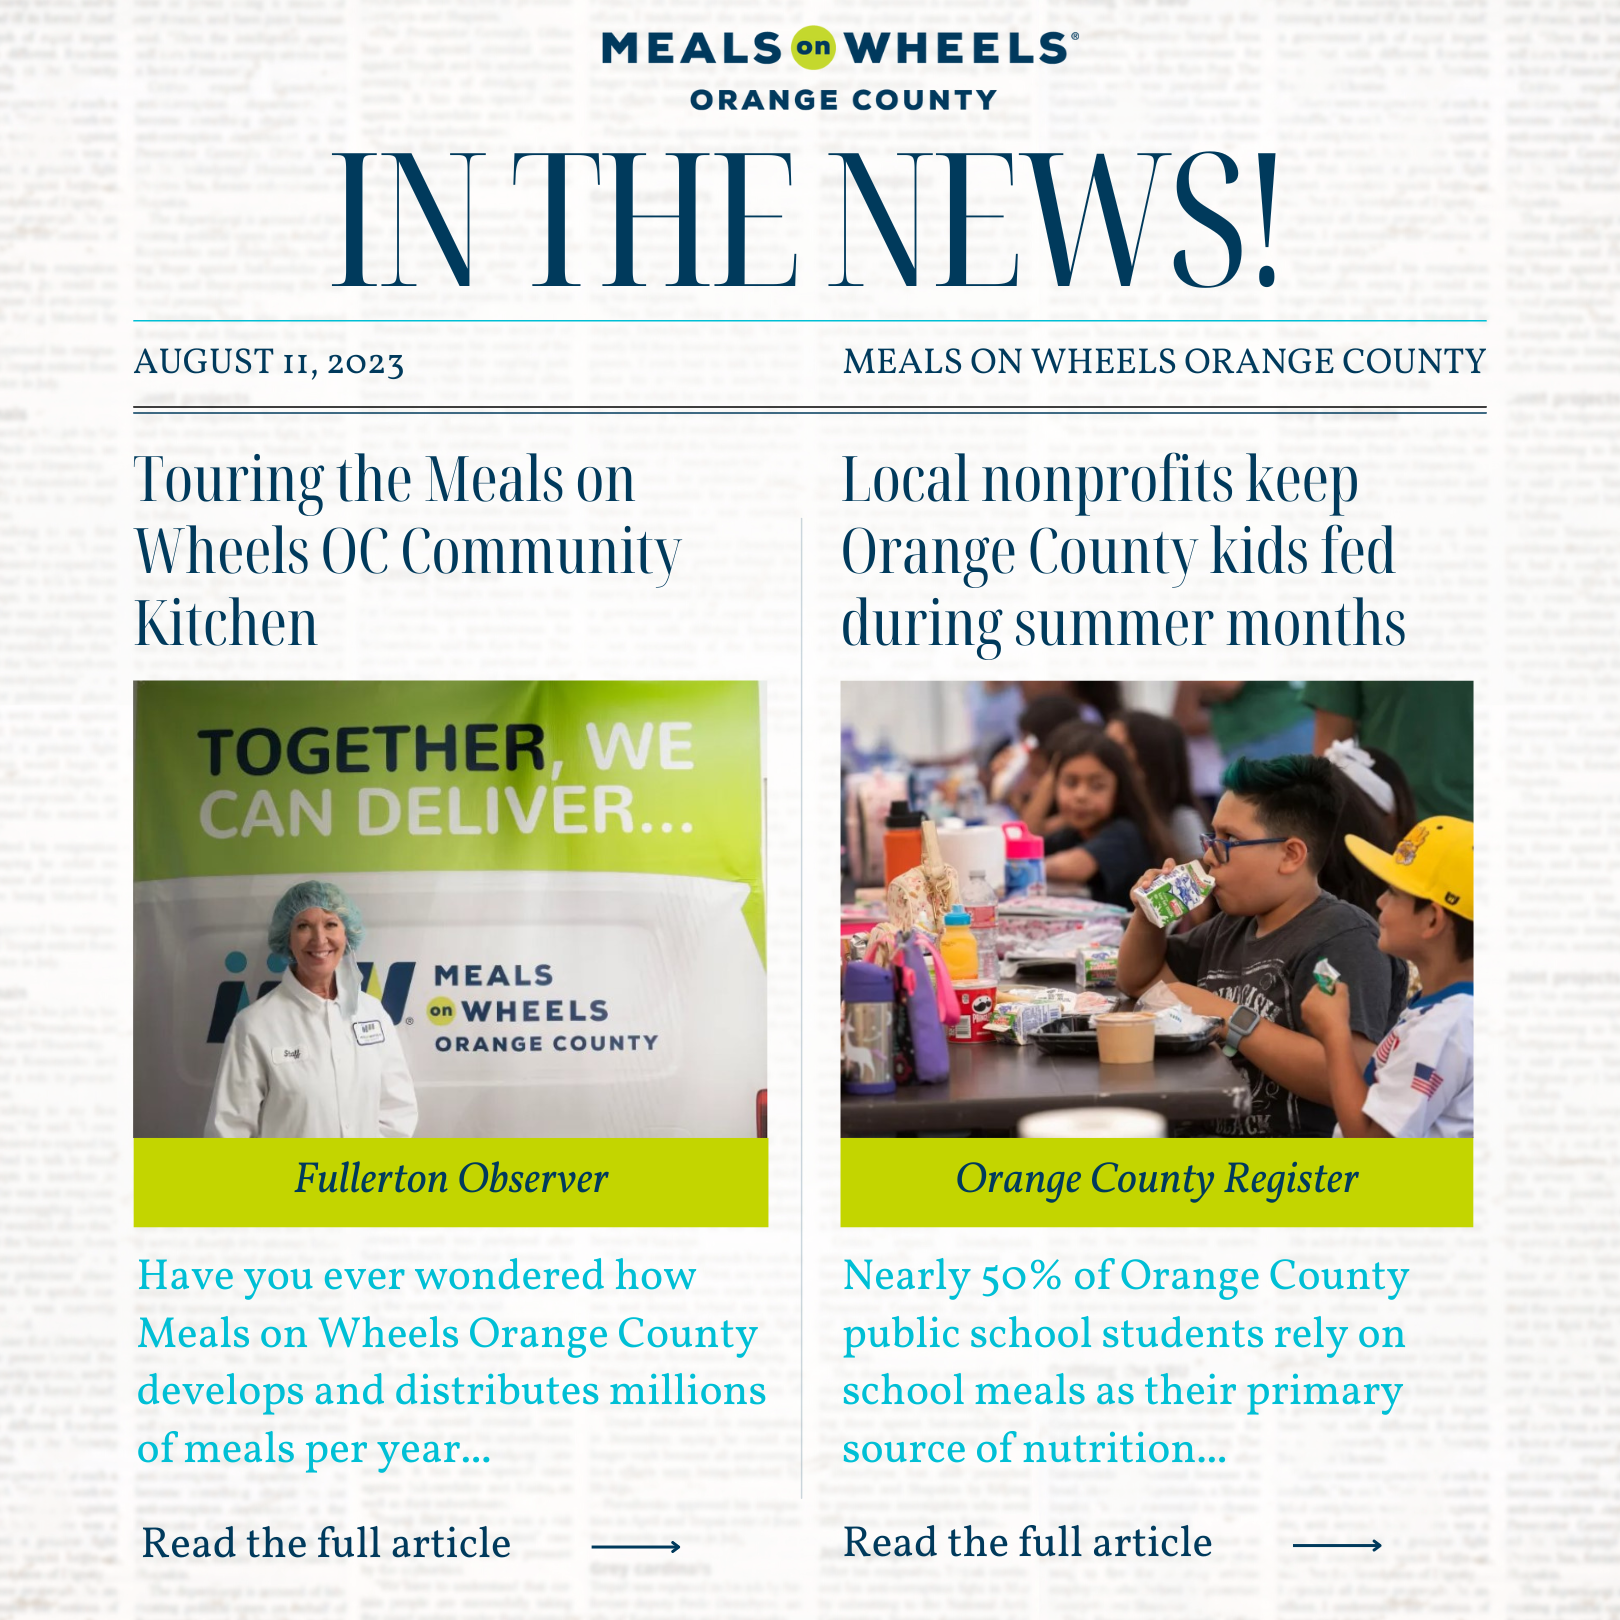 Meals on Wheels OC: In the News!